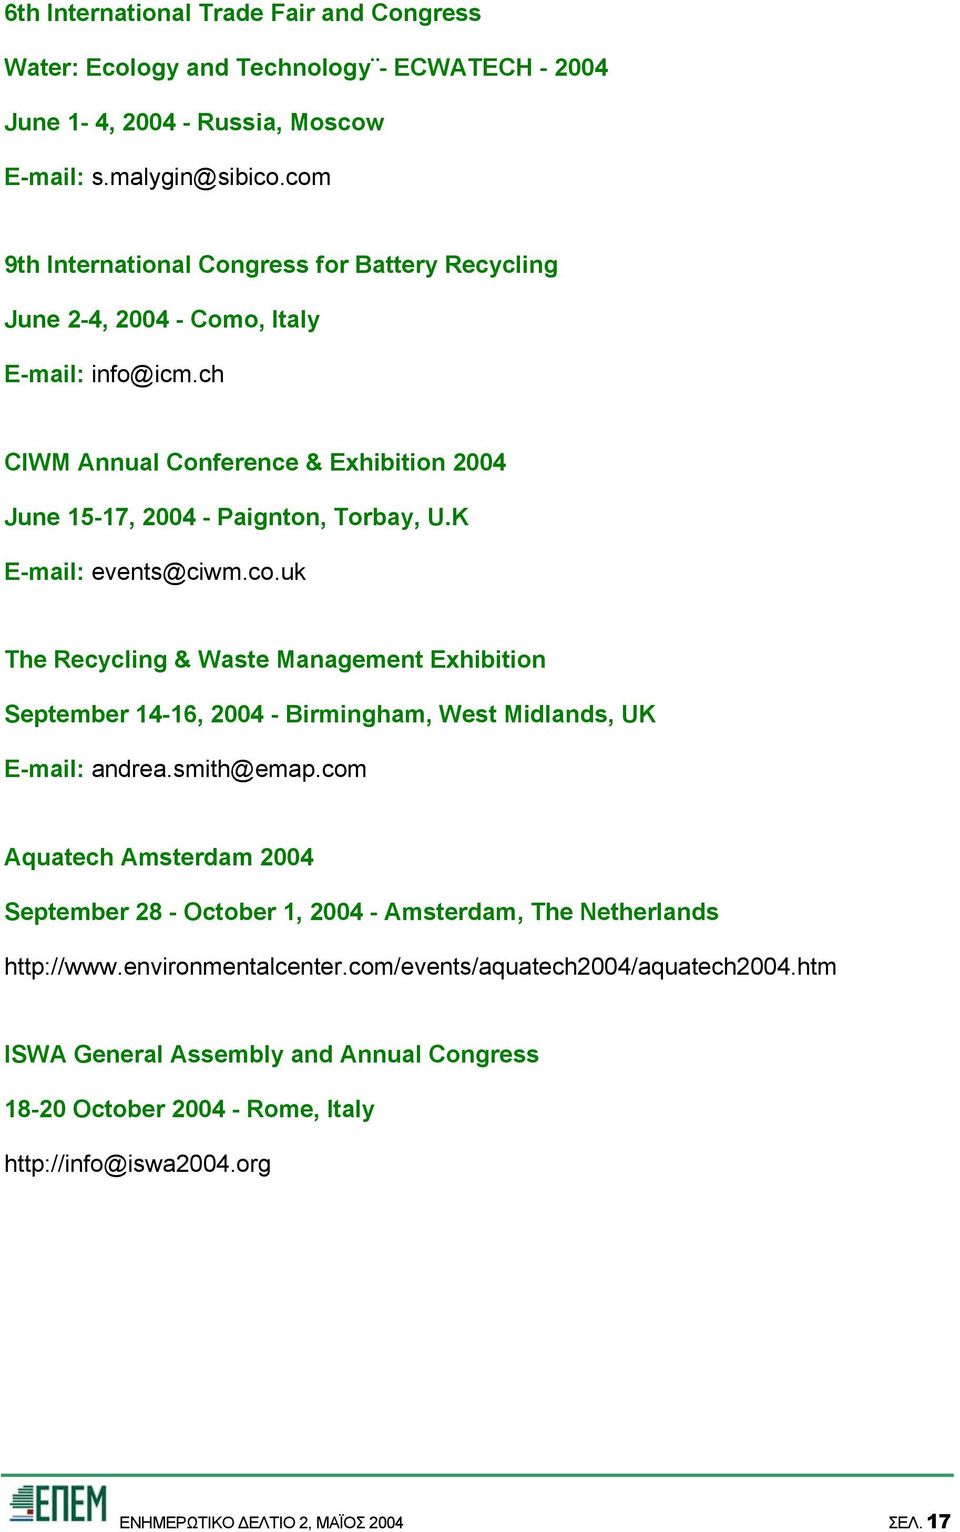 K E-mail: events@ciwm.co.uk The Recycling & Waste Management Exhibition September 14-16, 2004 - Birmingham, West Midlands, UK E-mail: andrea.smith@emap.